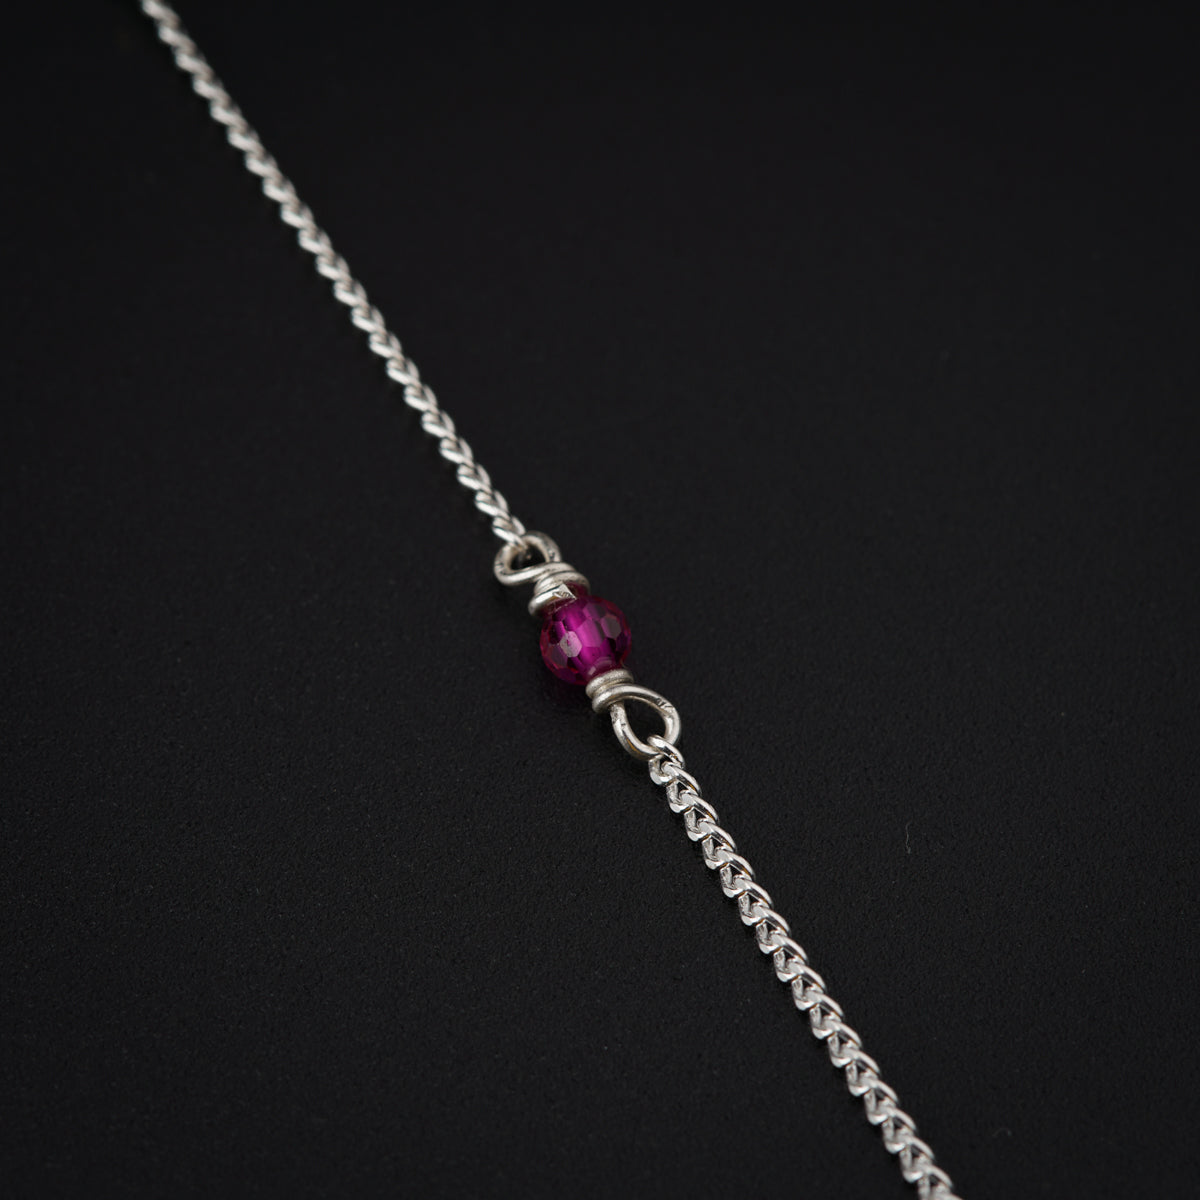 a silver chain with a purple bead on it